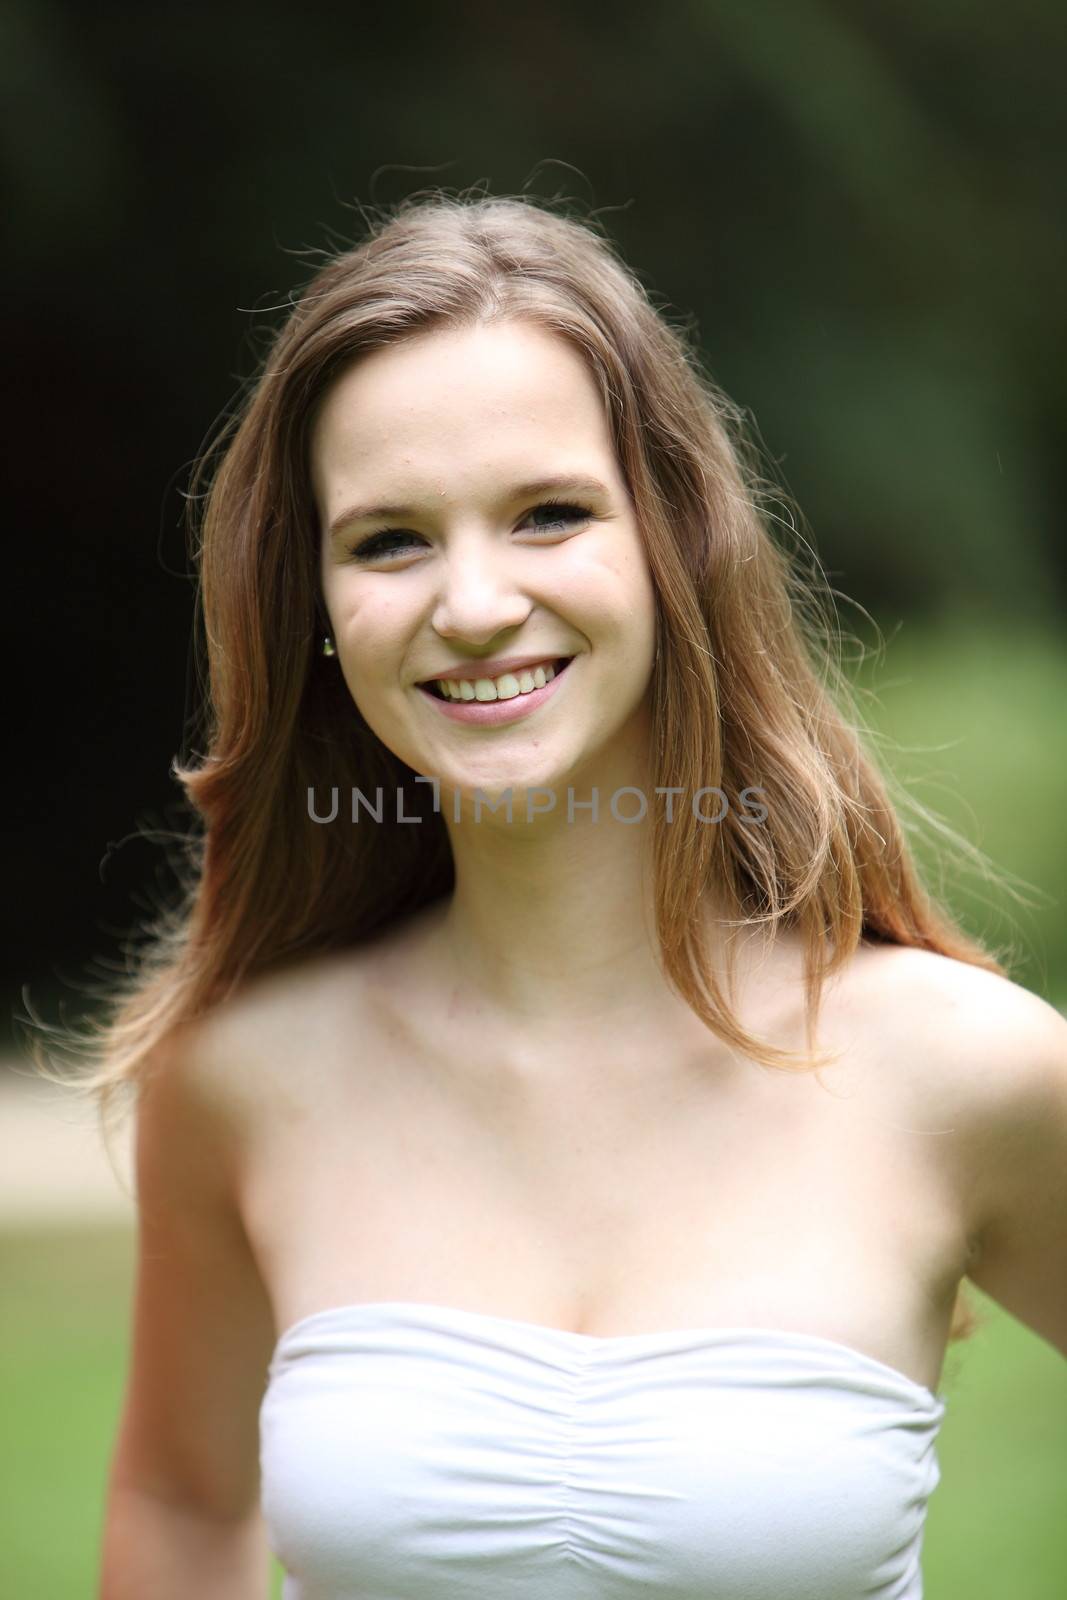 Young smiling woman in a close up portrait